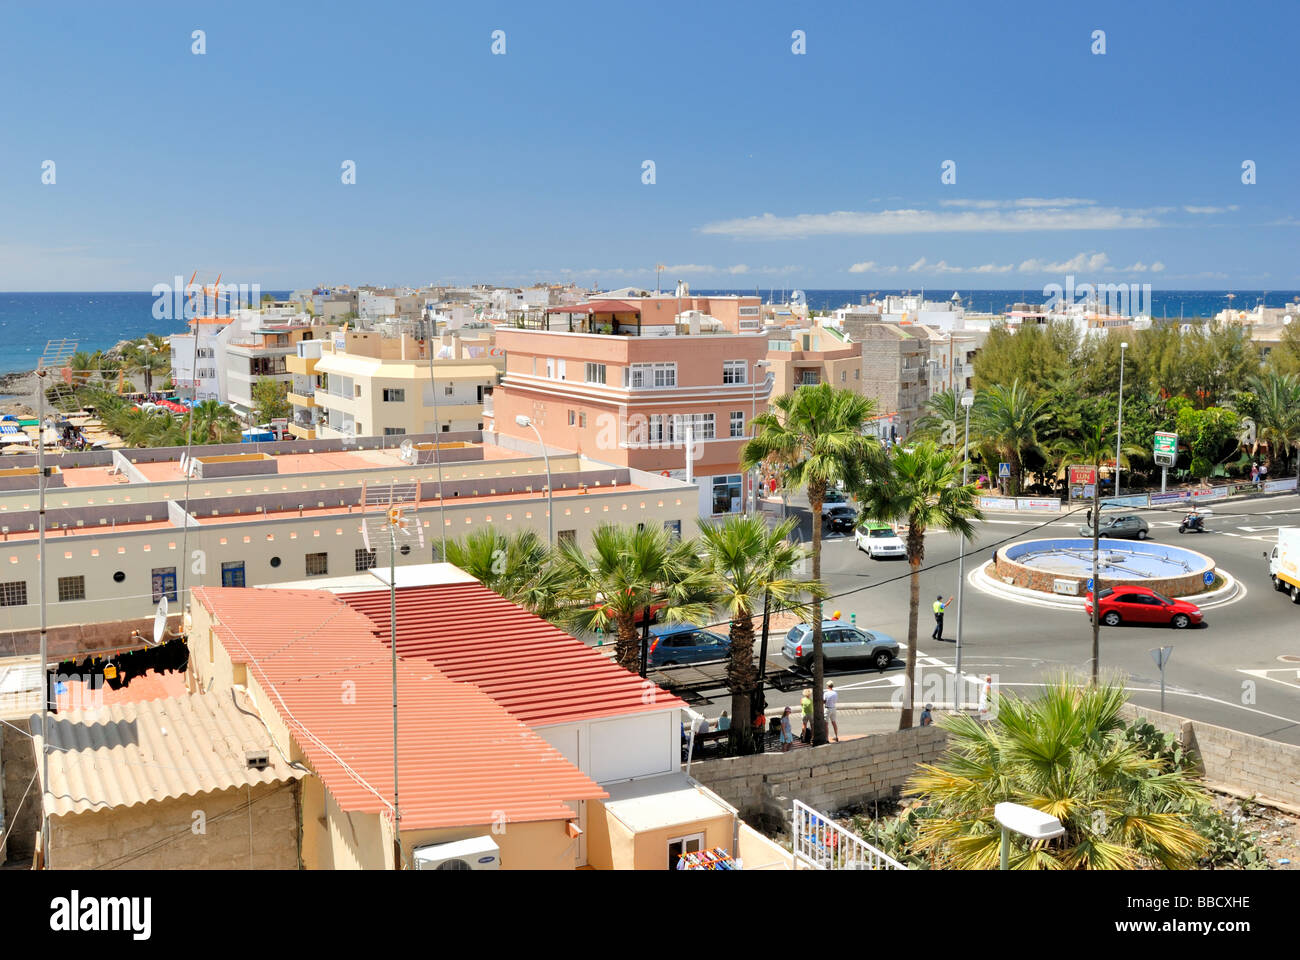 A fine overview of the small coastal village of Arguineguin, Gran Canaria, Canary Islands, Spain, Europe, Stock Photo